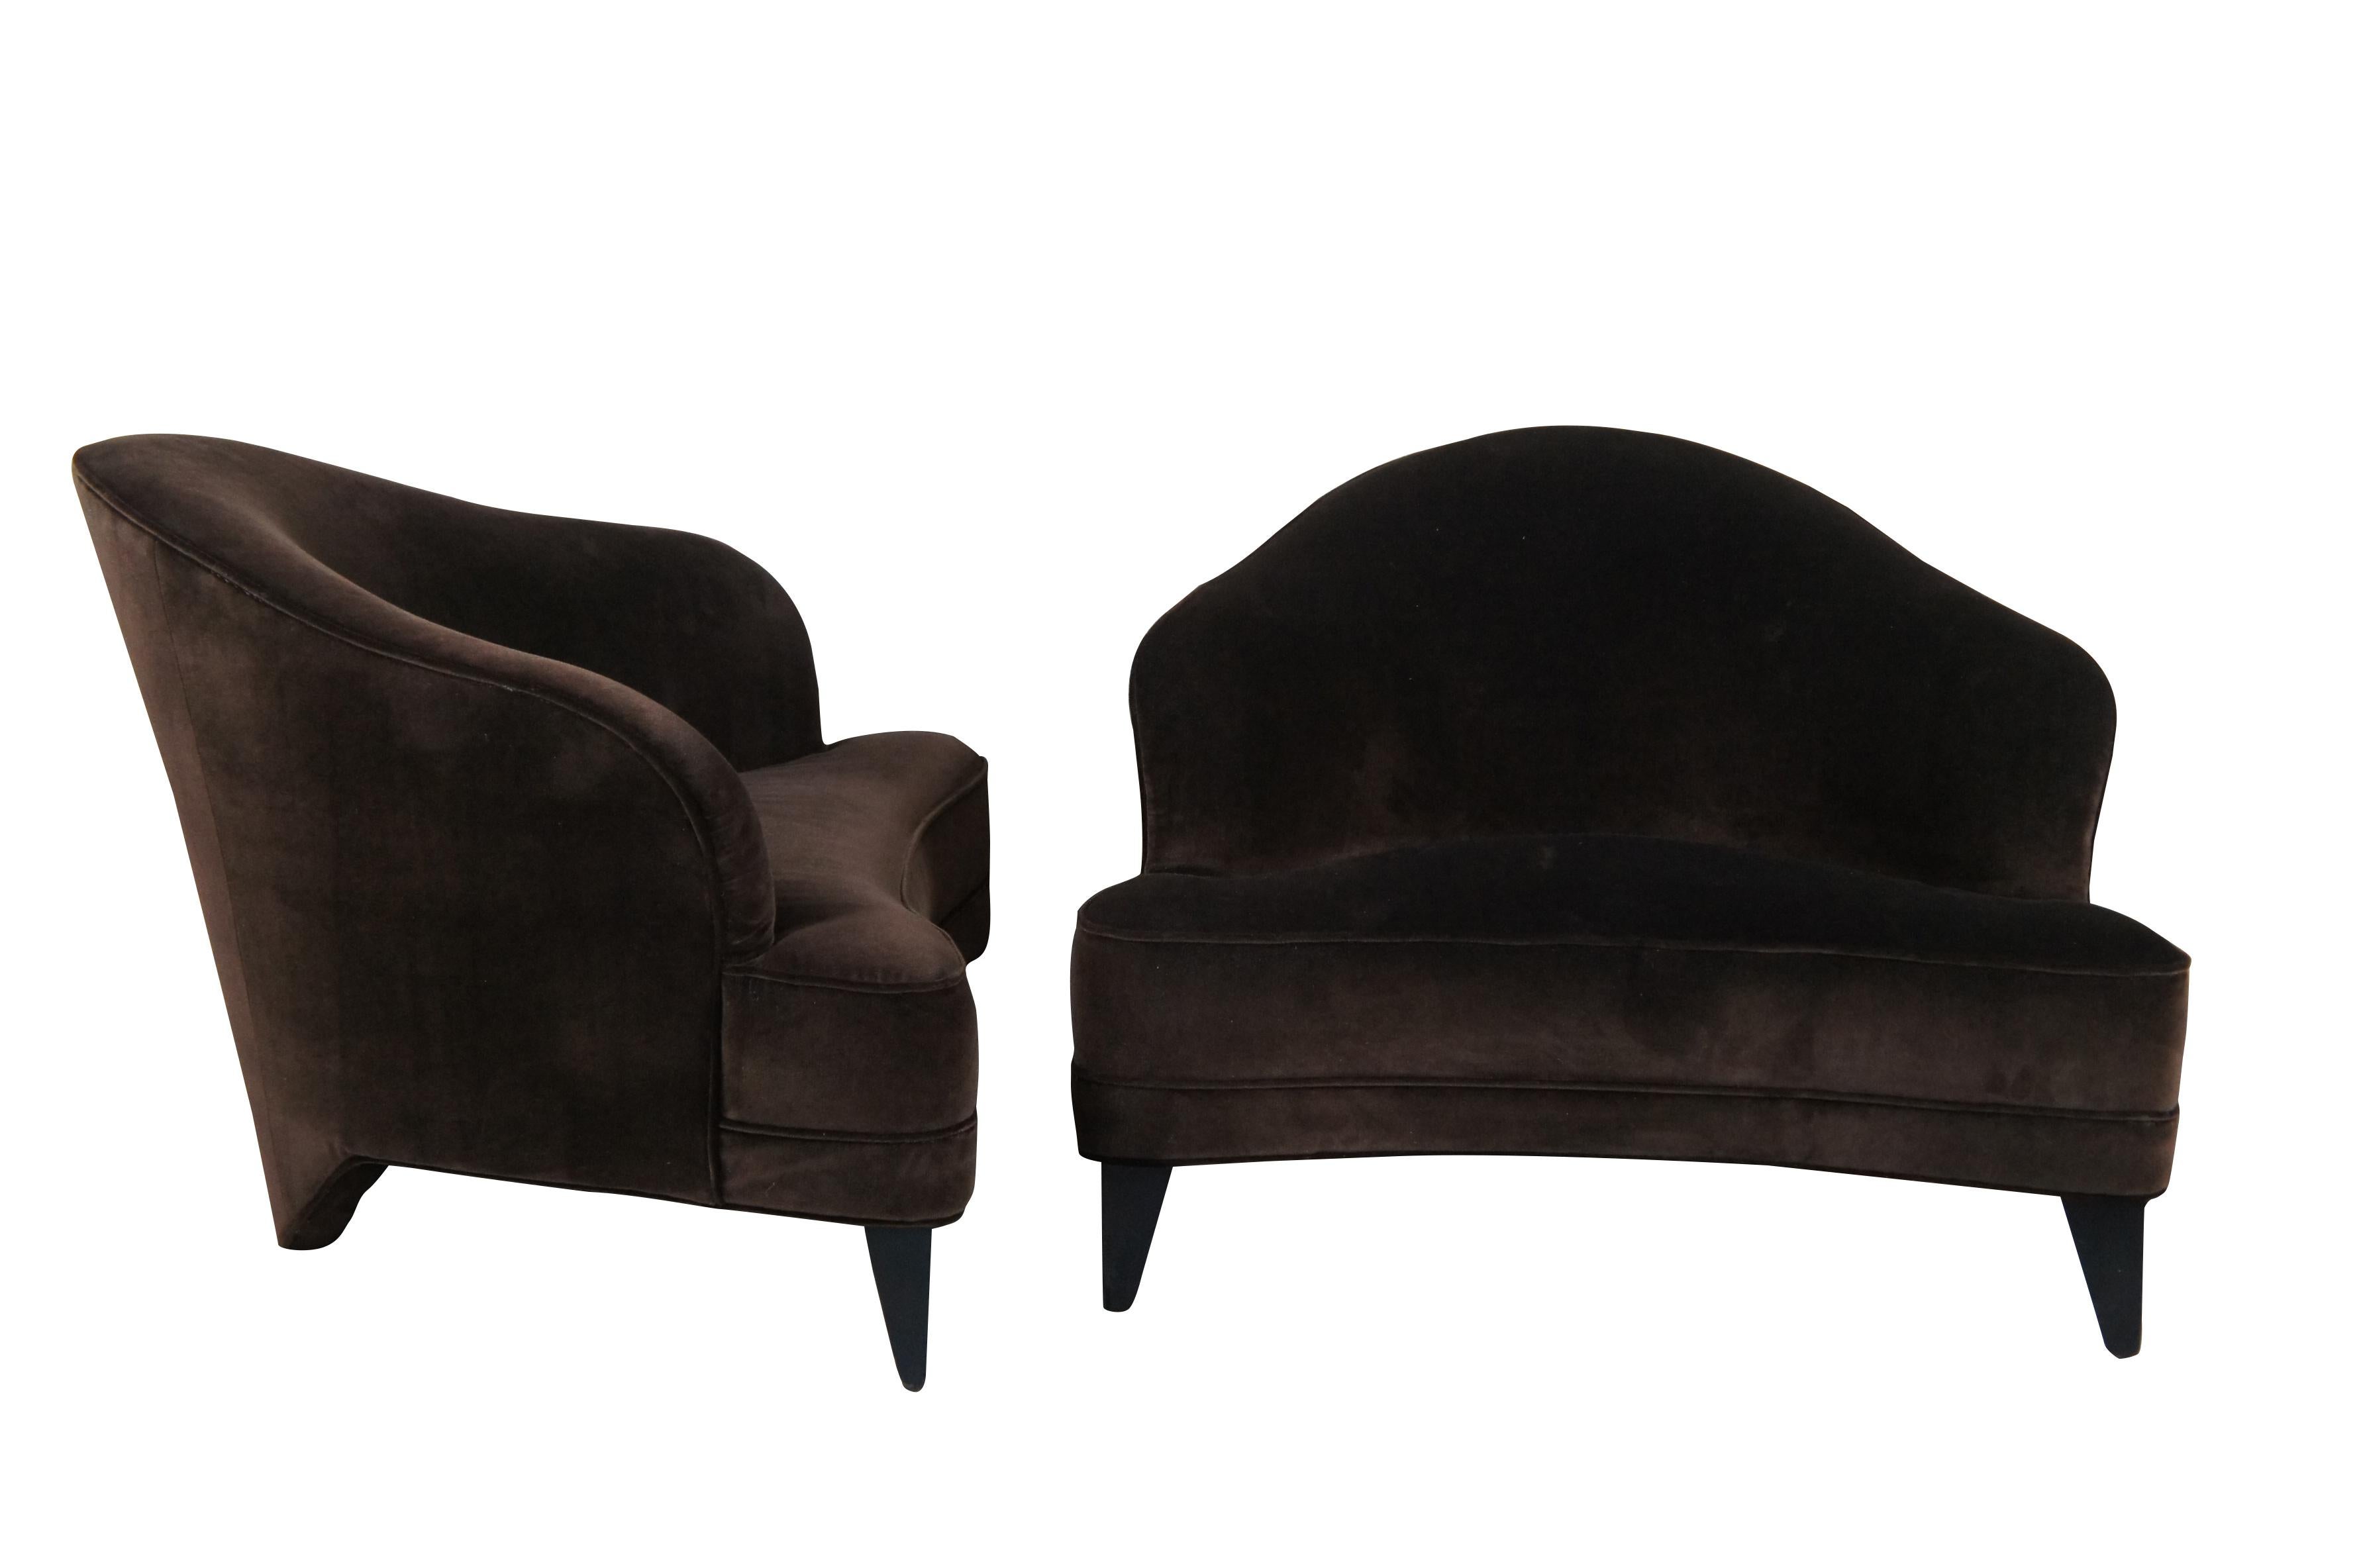 A pair of chocolate mohair chairs by Leon Rosen for Pace.  Features a unique triangular form with downswept arms and a plush seat.  Each chair is supported by black tapered feet.  The set was recently recovered in the brown mohair.

The Pace